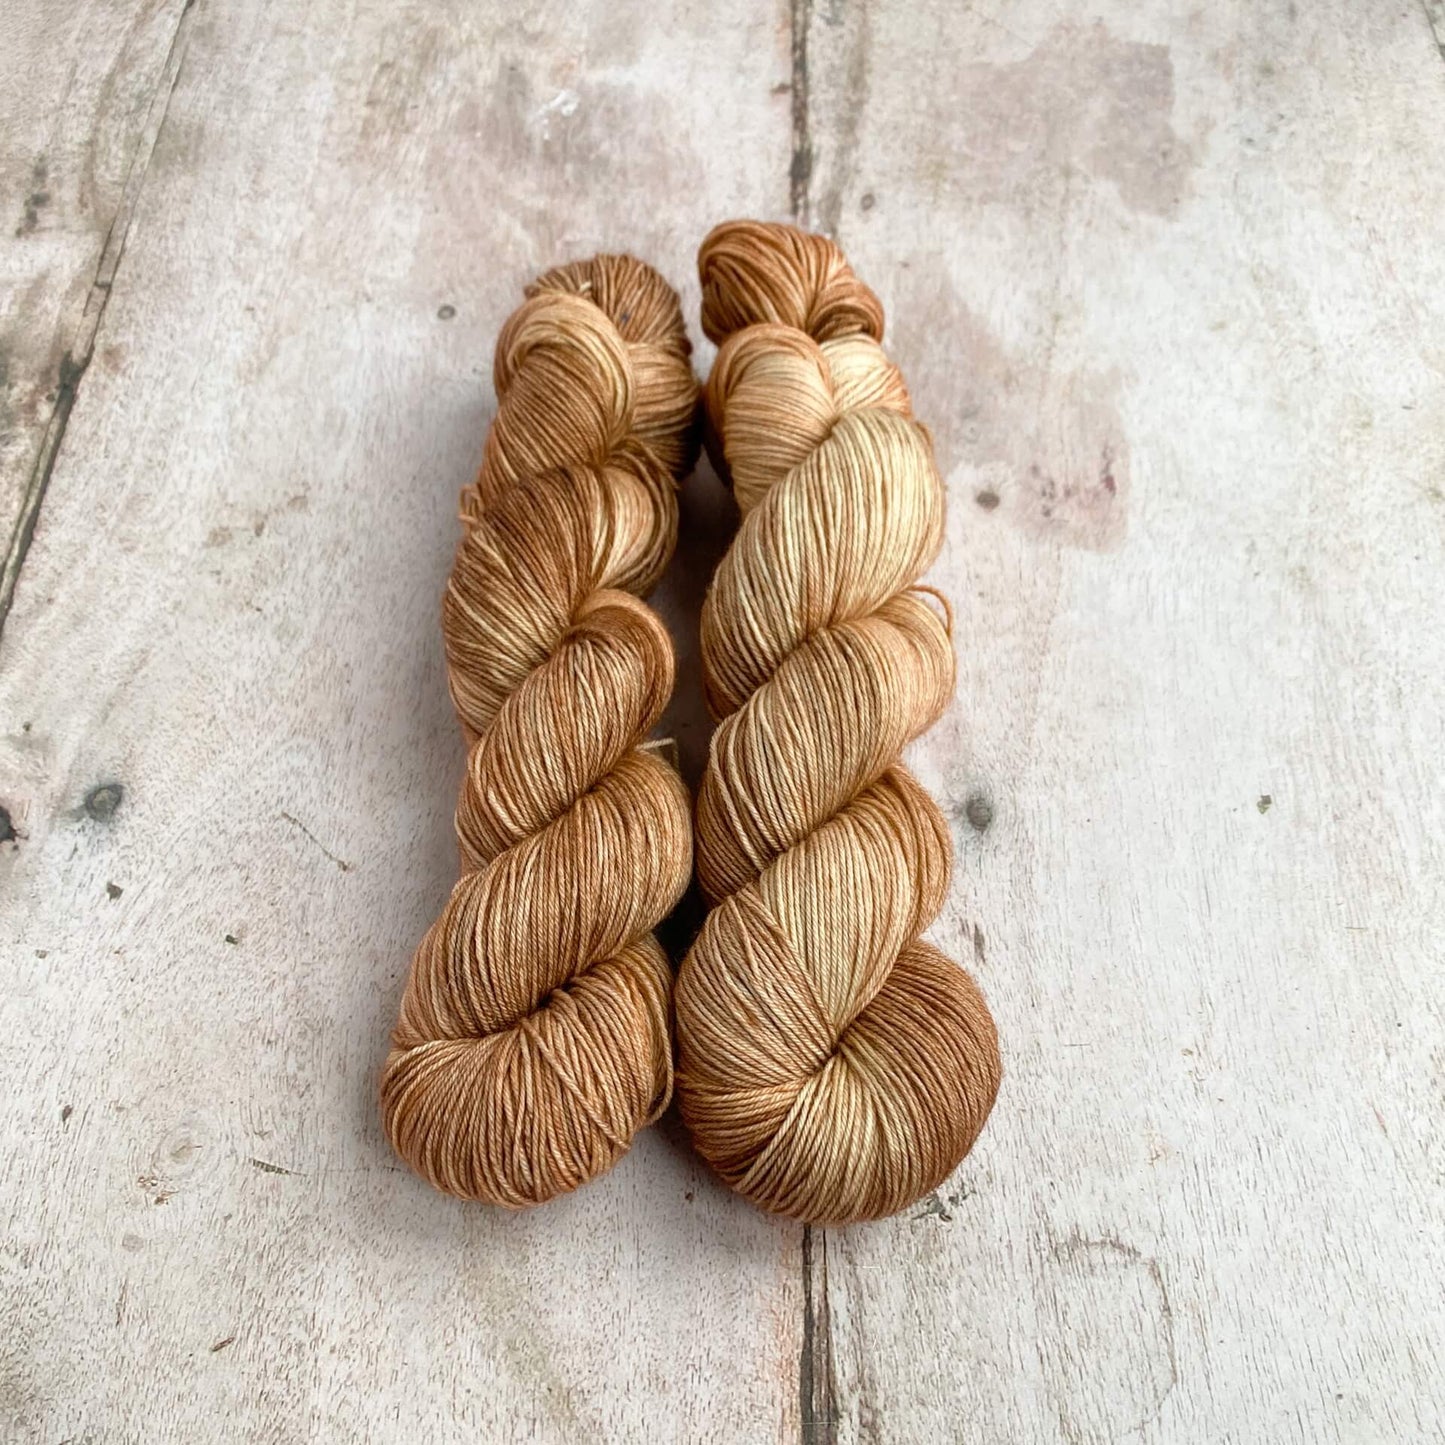 Two milky brown hand dyed skeins of yarn sit next to each other on a wooden table. They are wound into hanks. 